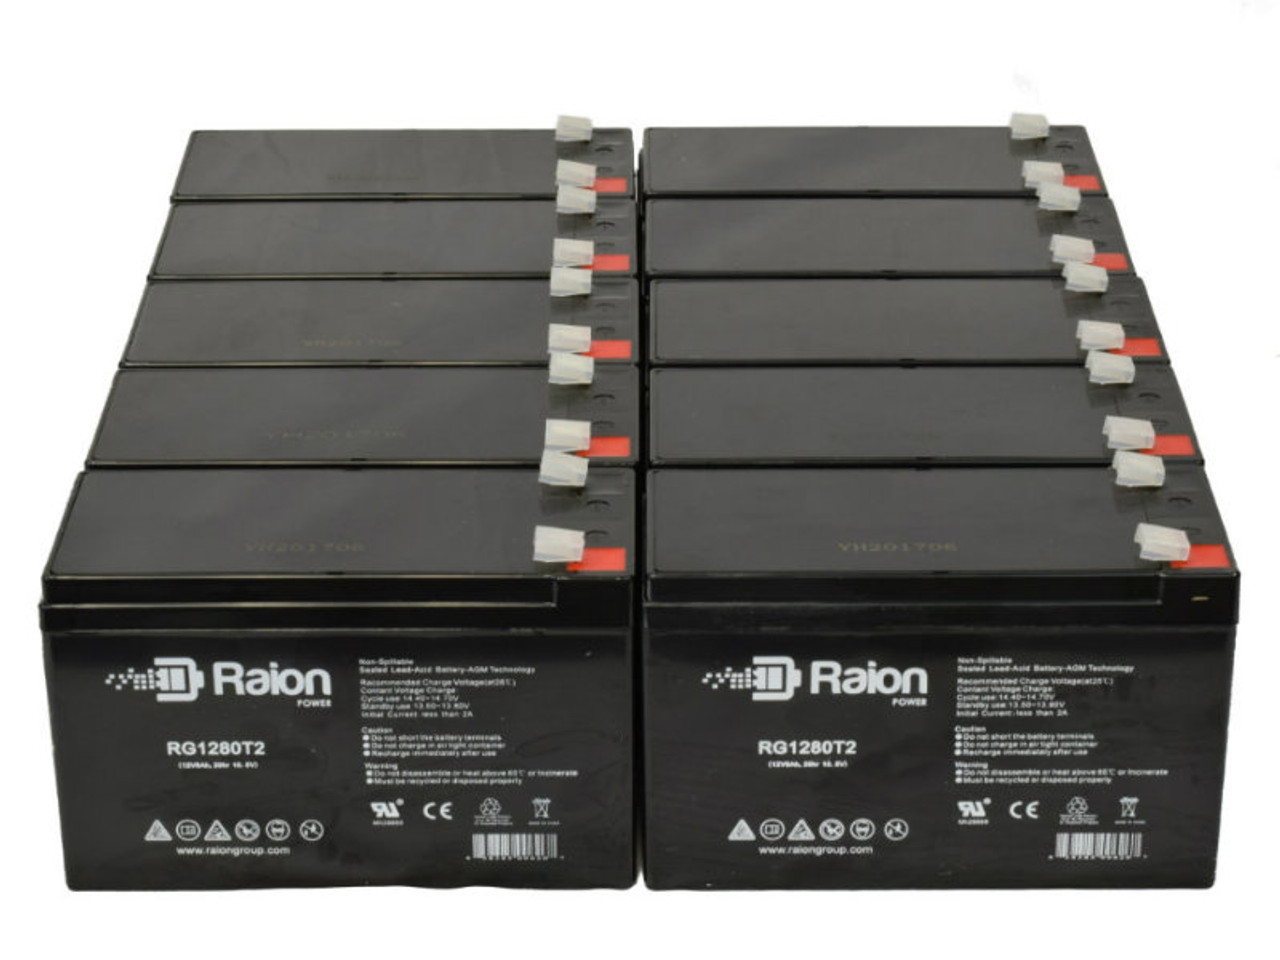 Raion Power Replacement 12V 8Ah RG1280T2 Battery for Astro-Med Inc. II Astromed Recorder Dash II - 10 Pack